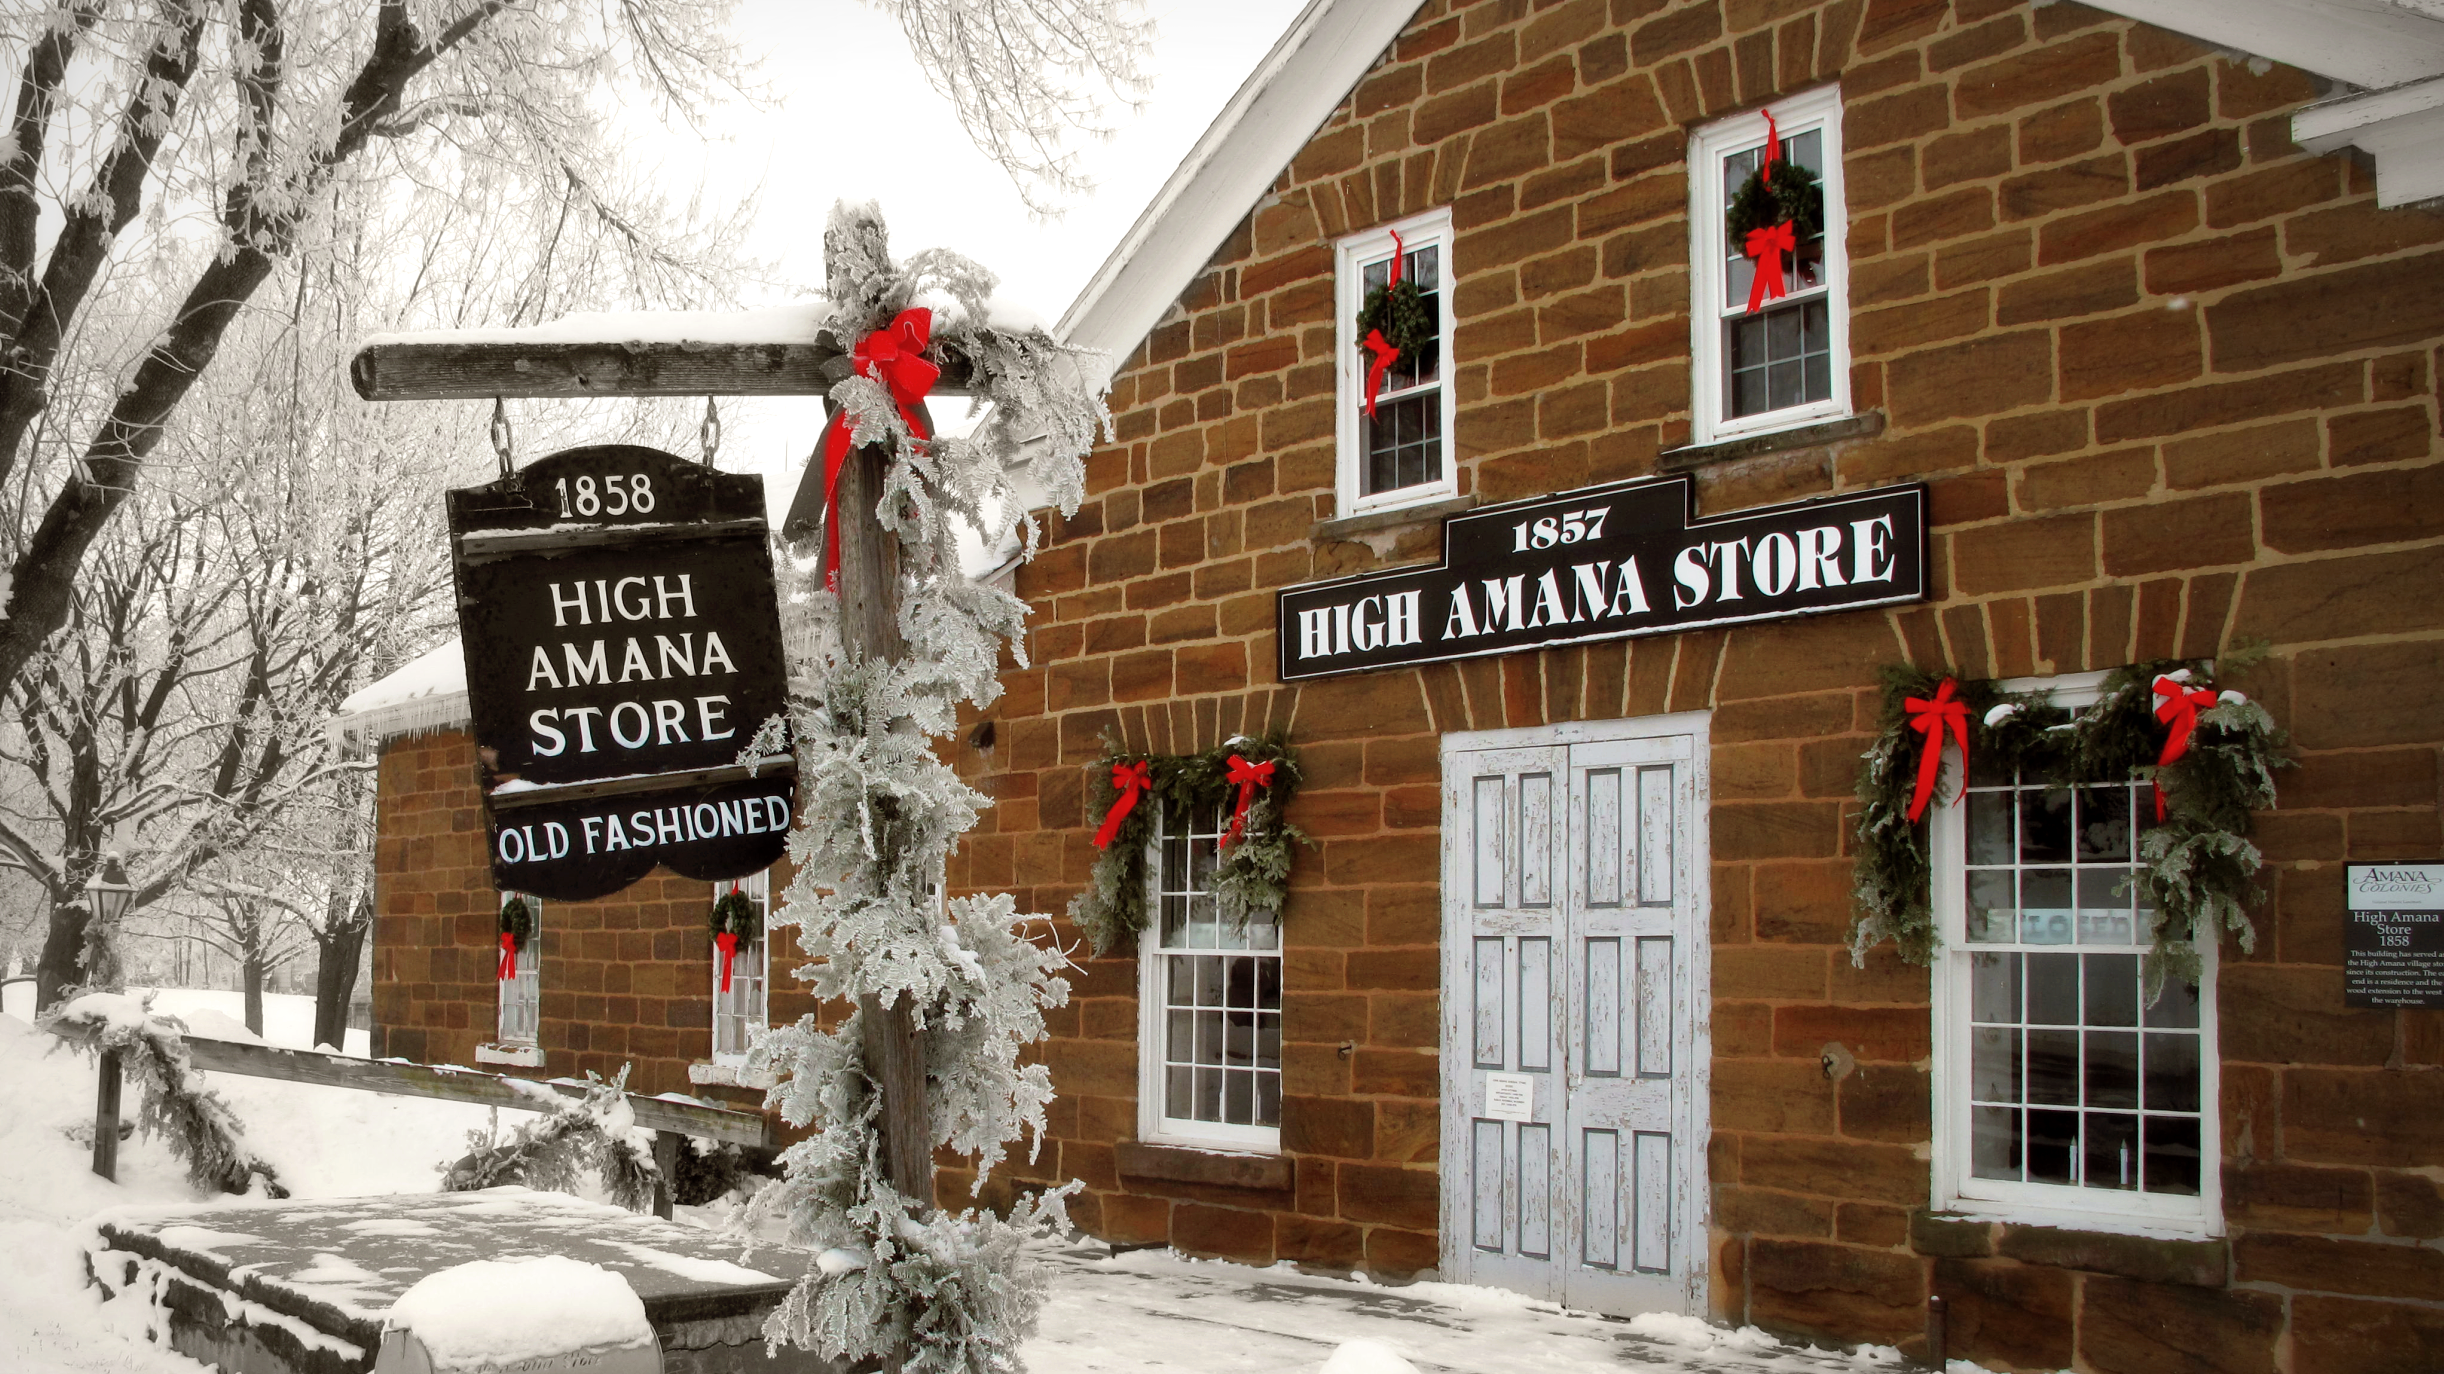 exterior of the high amana store after snow